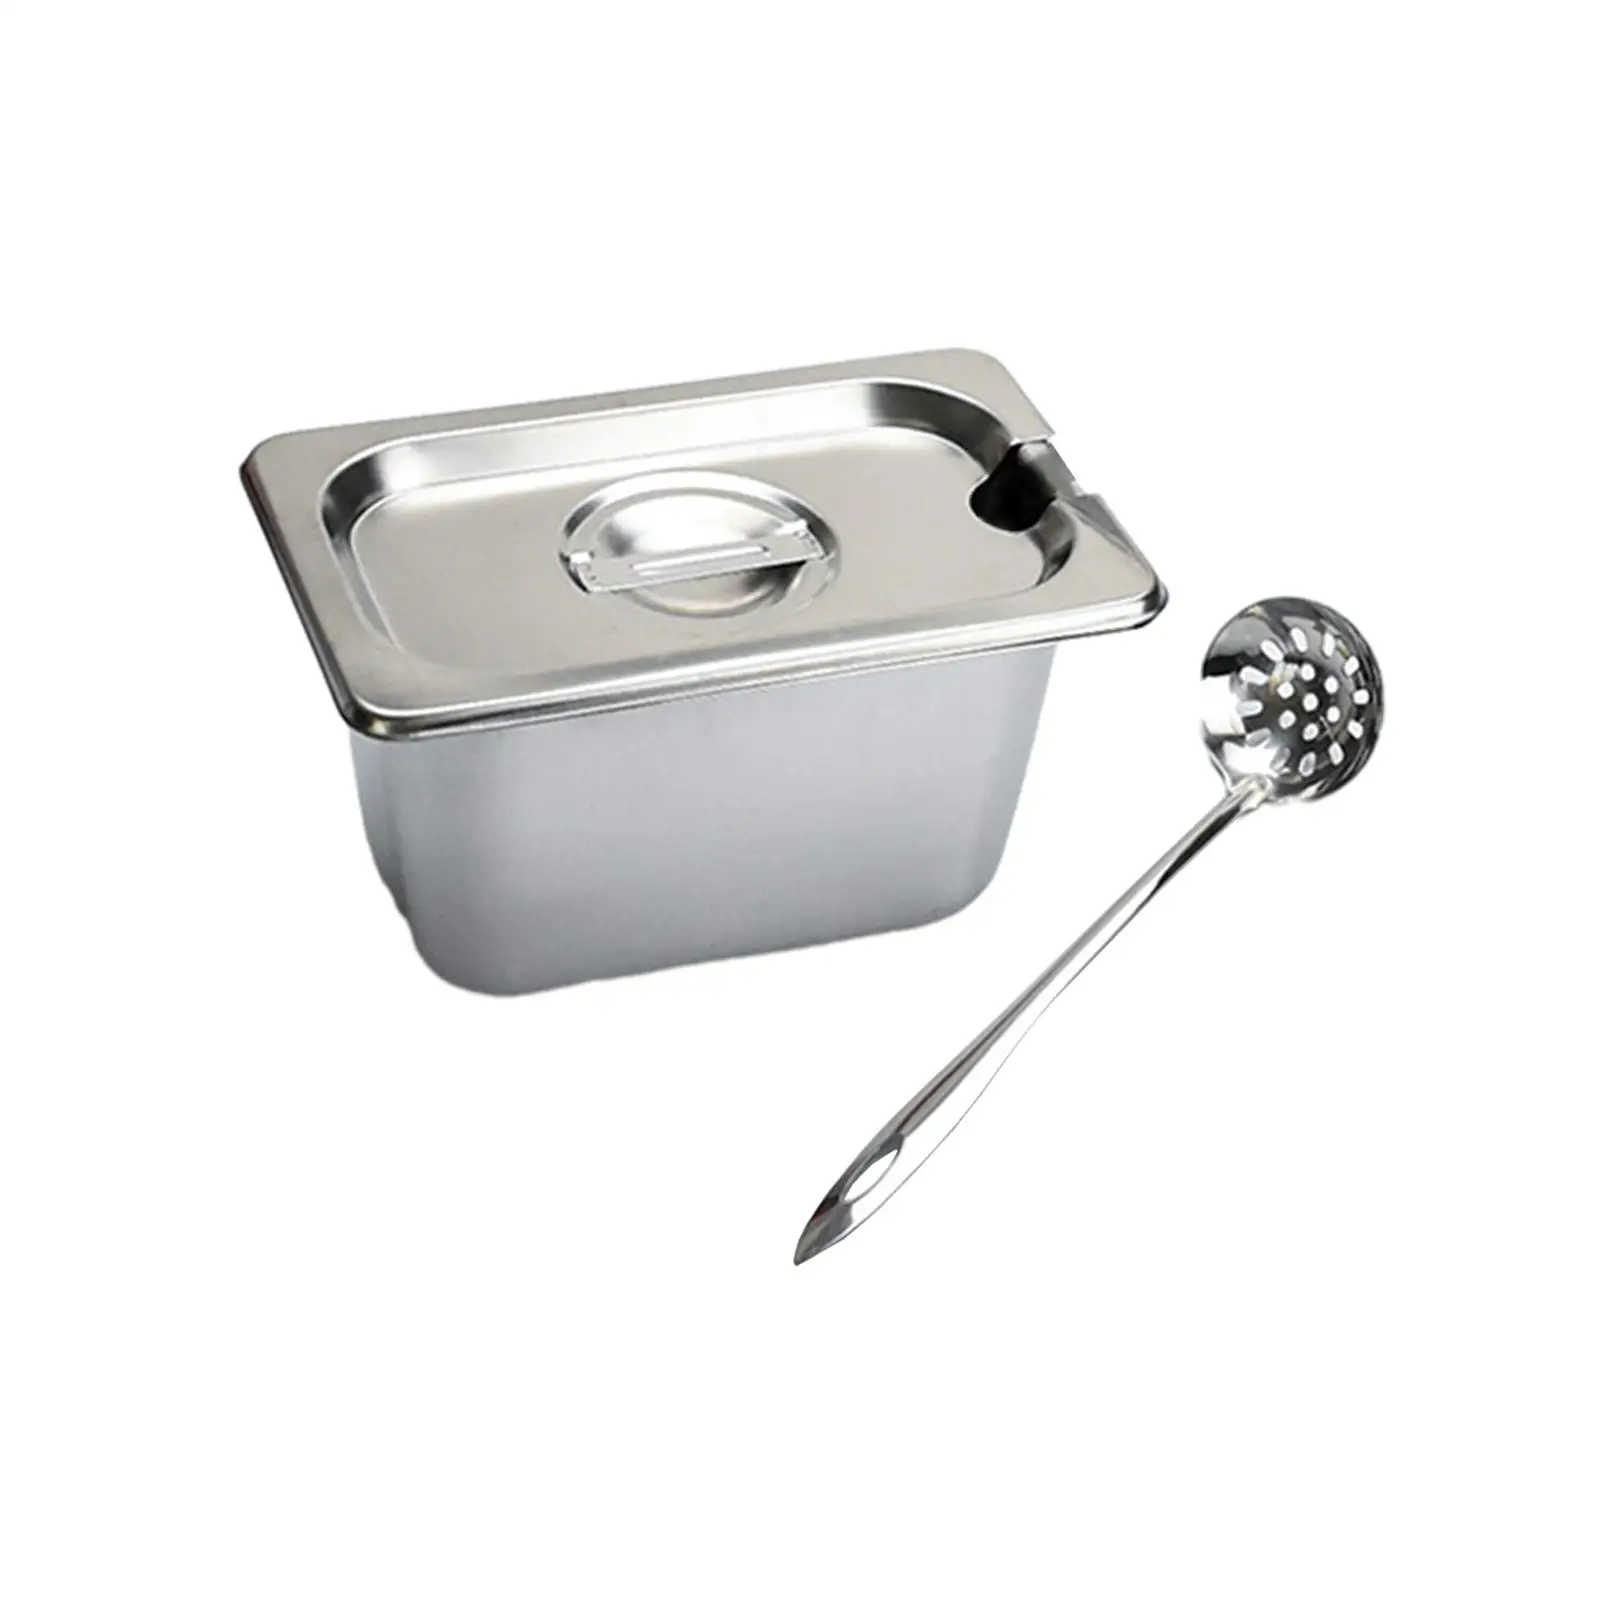 Stainless Steel Hotel Pans Multifunctional with Lids and Spoon Steam Table Pan for Buffet Chafing Dish Restaurant Food